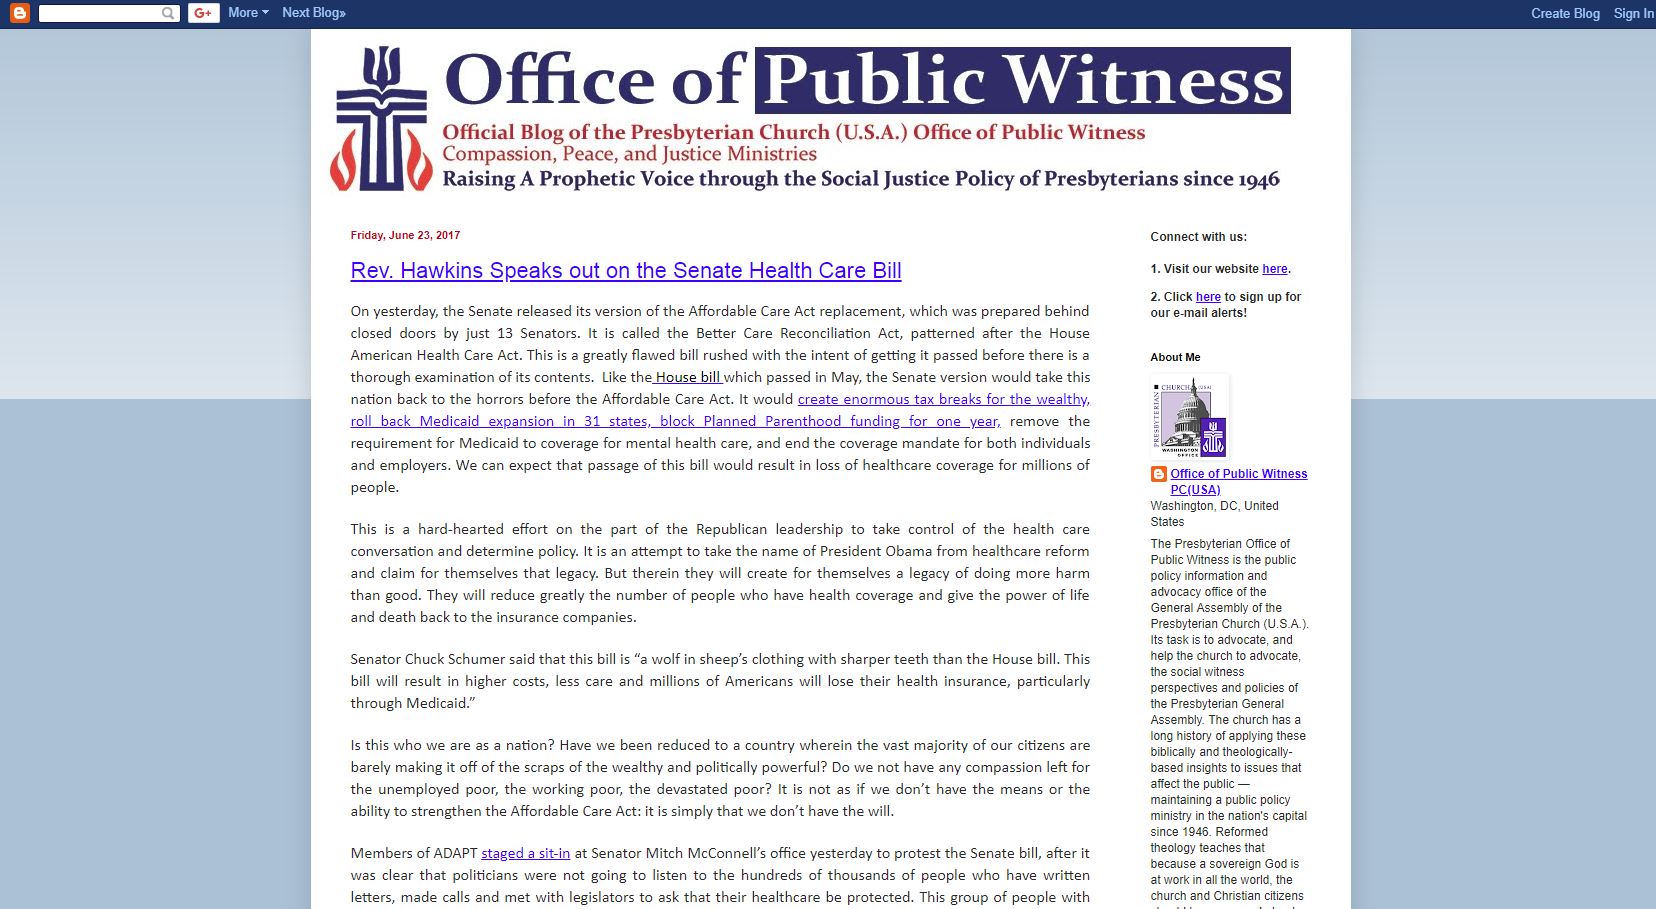 PC(USA) Office of Public Witness.